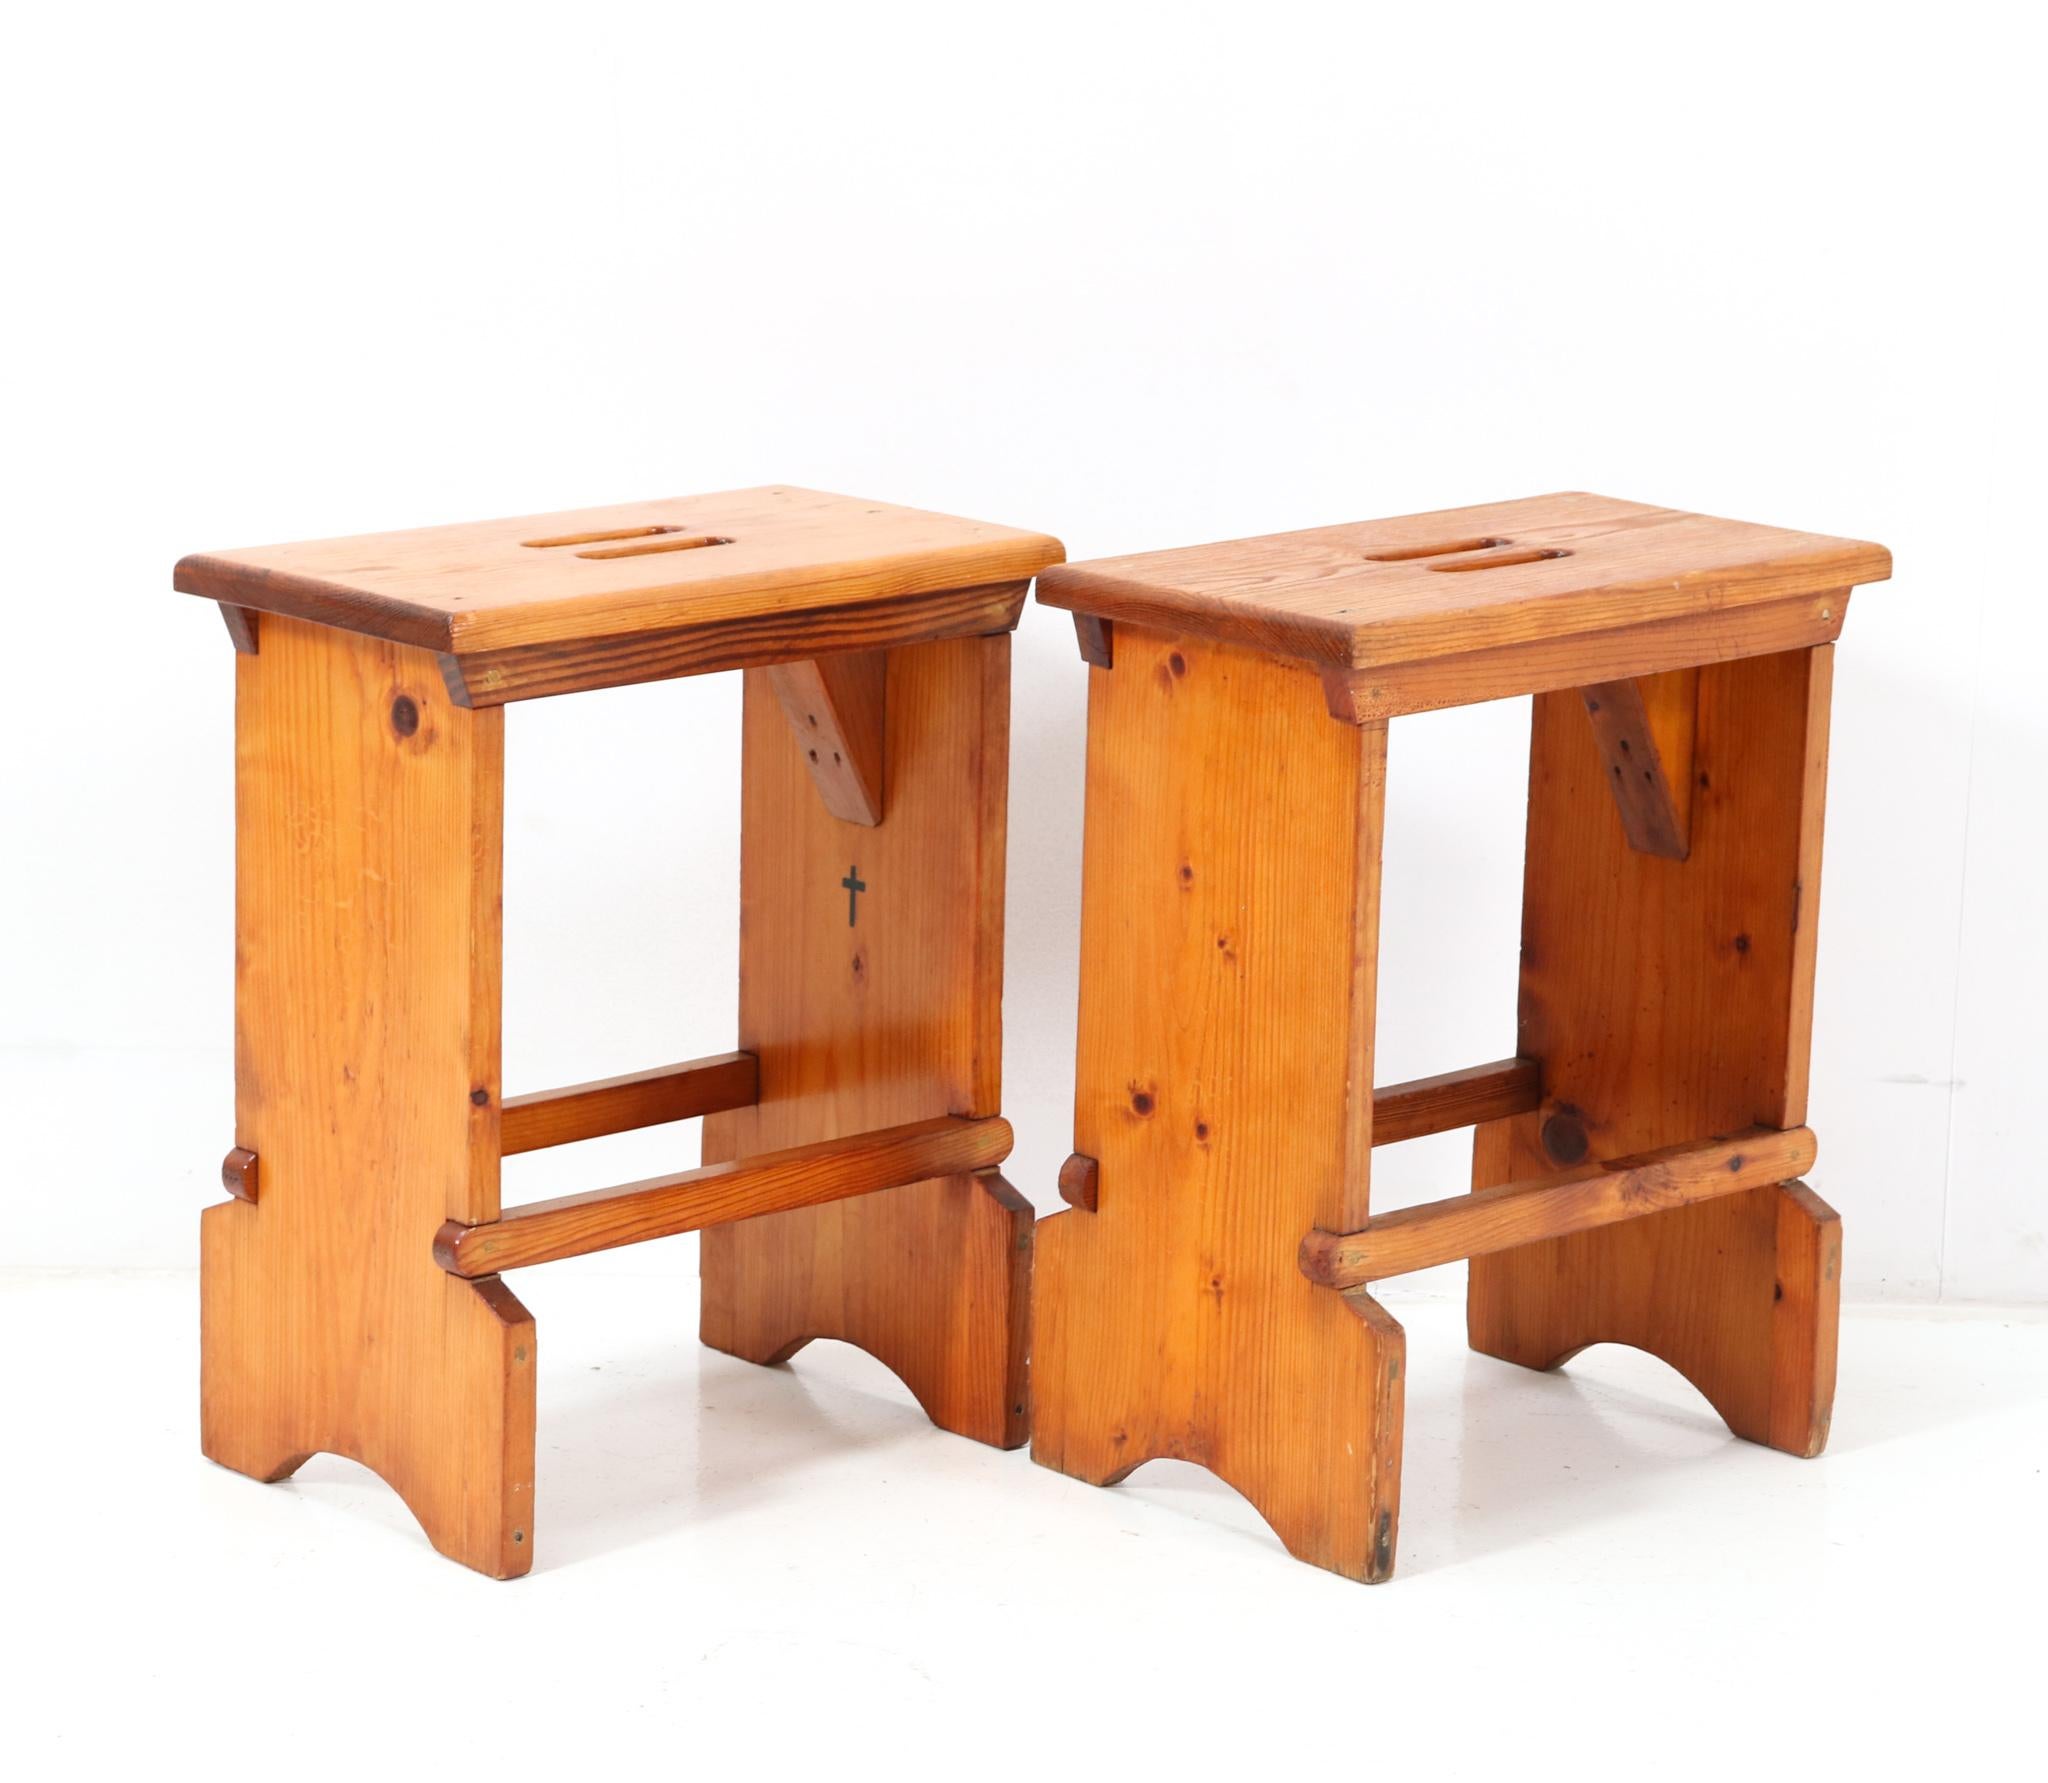 Amazing pair of Mid-Century Modern Monastery stools.
Striking Dutch design from the 1960s.
Solid pine frames and tops and they were designed for a Dutch Monastery in the South of the Netherlands.
This wonderful pair of Mid-Century Modern Monastery